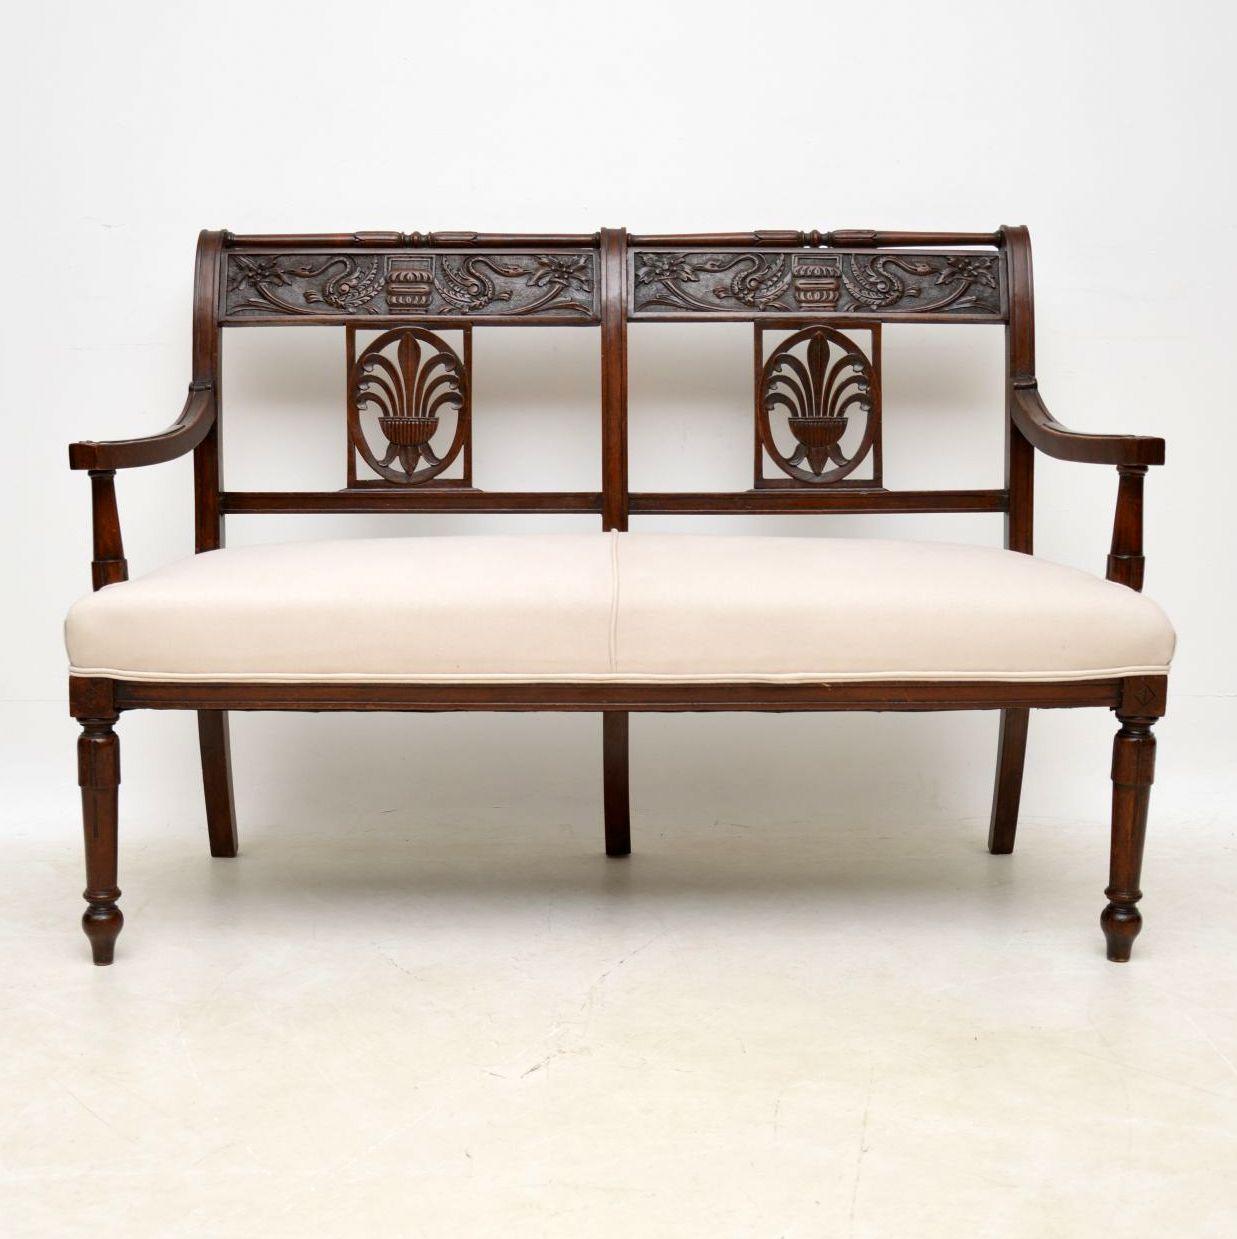 Antique Victorian mahogany upholstered settee with plenty of deep carvings and in good original condition, dating from circa 1860s-1880s period. The back has two carved top rails and some stunning carvings of dragons plus other items and two carved